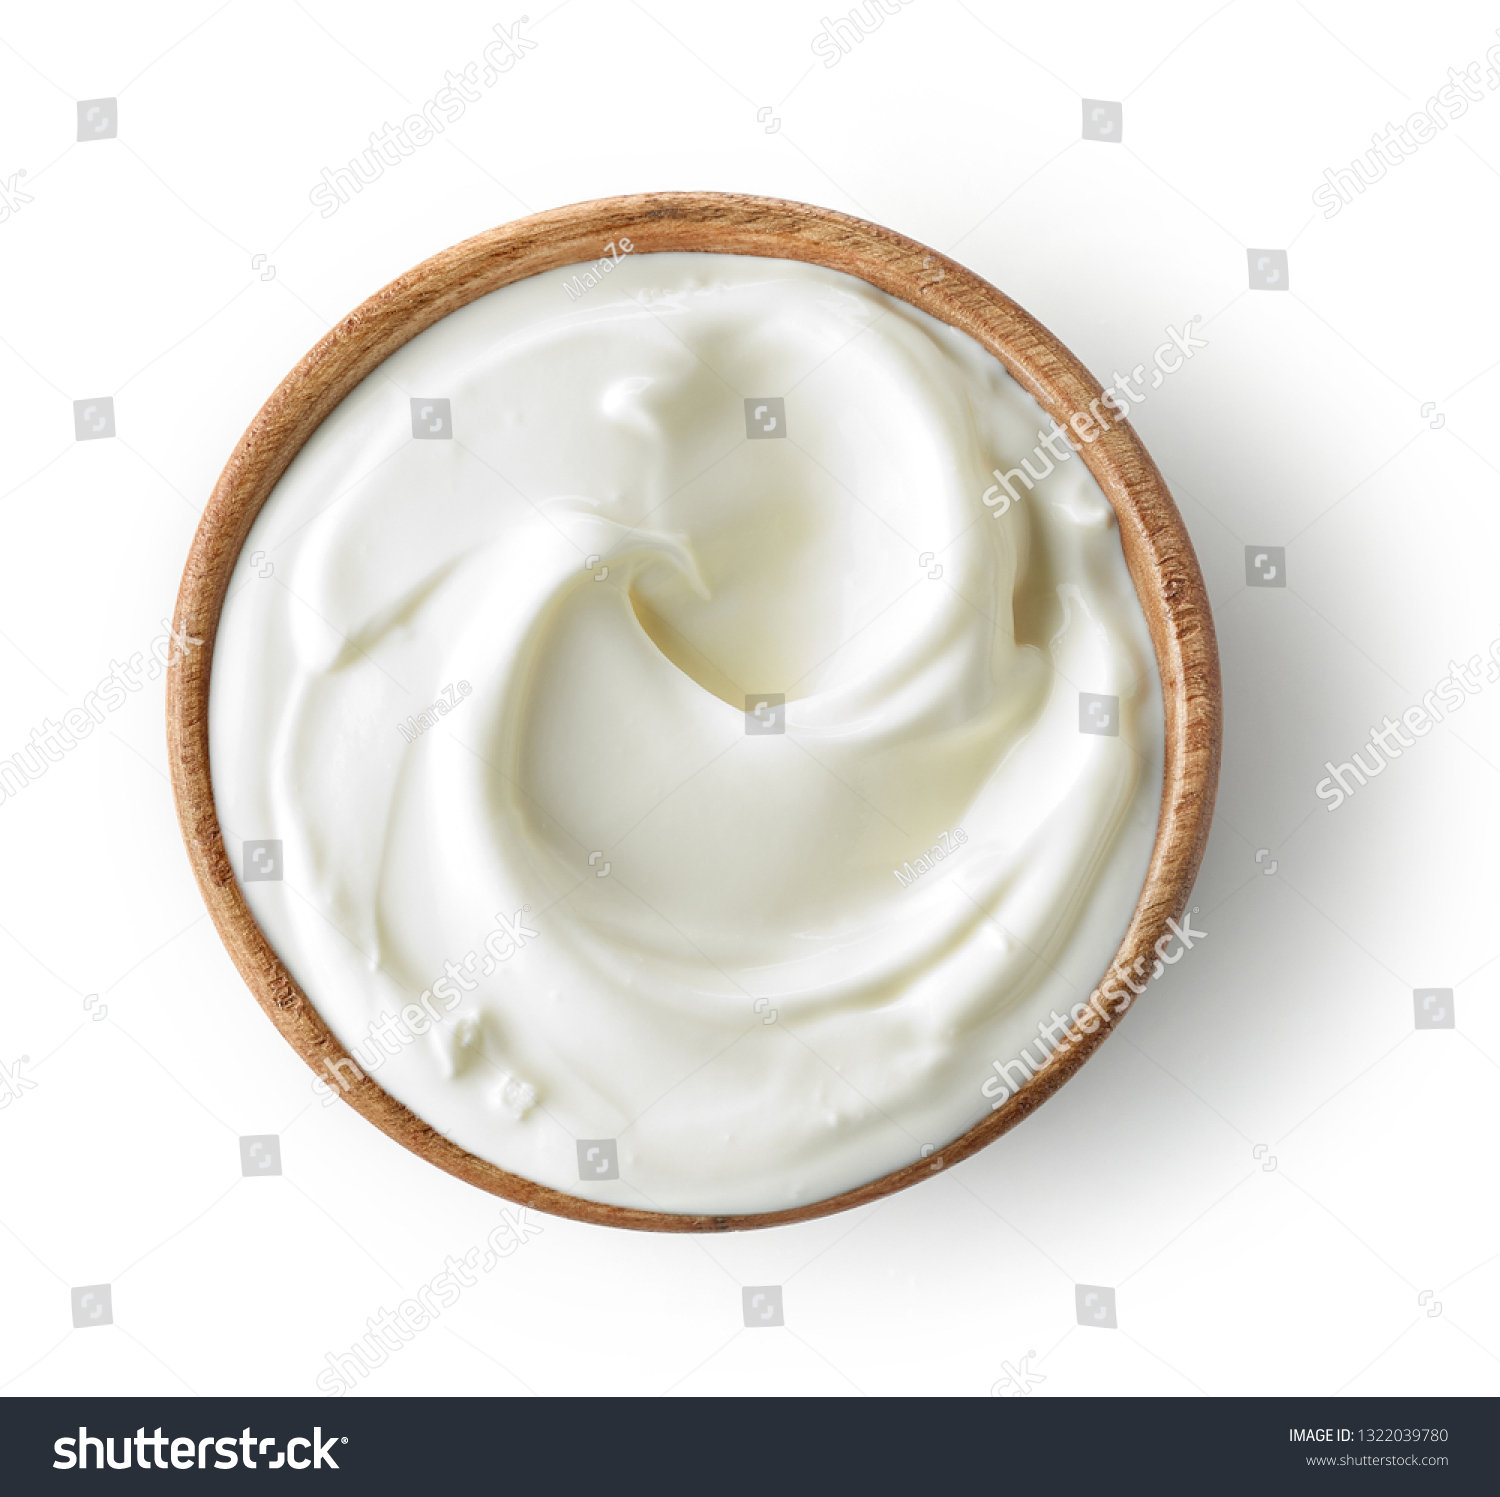 wooden bowl of sour cream or yogurt isolated on white background, top view #1322039780